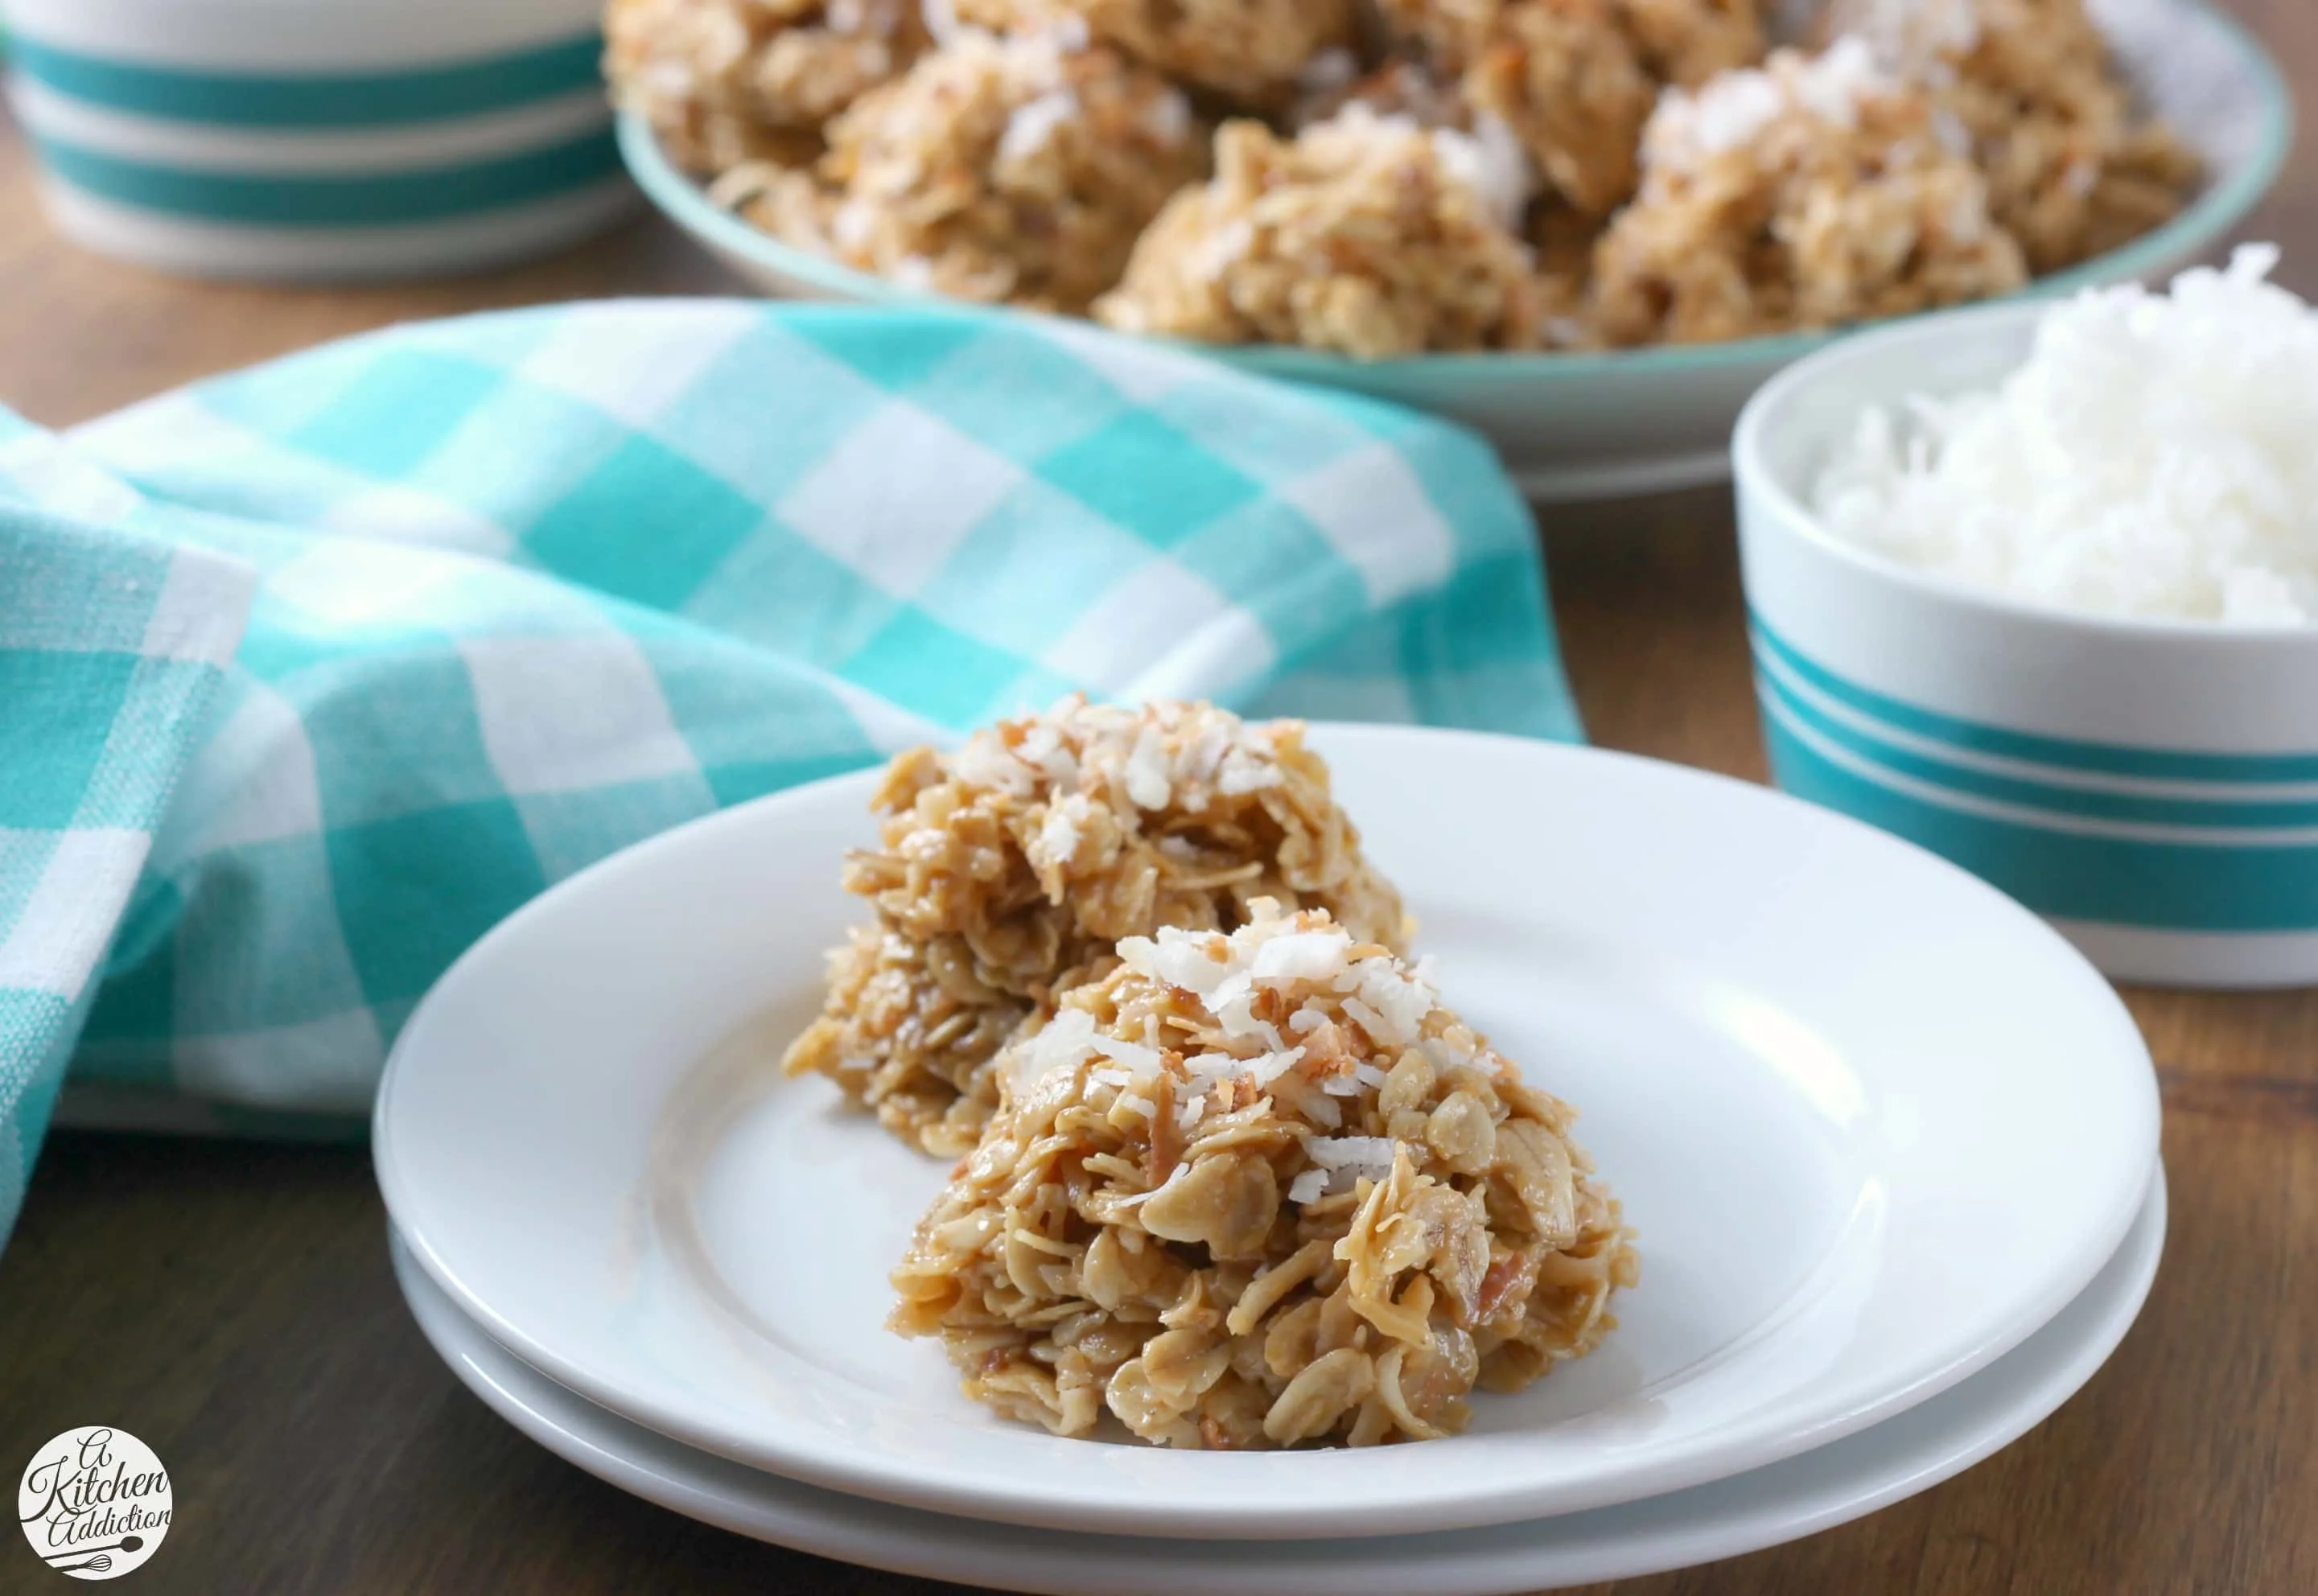 Lightened Up Coconut Peanut Butter No Bake Cookies Recipe from A Kitchen Addiction